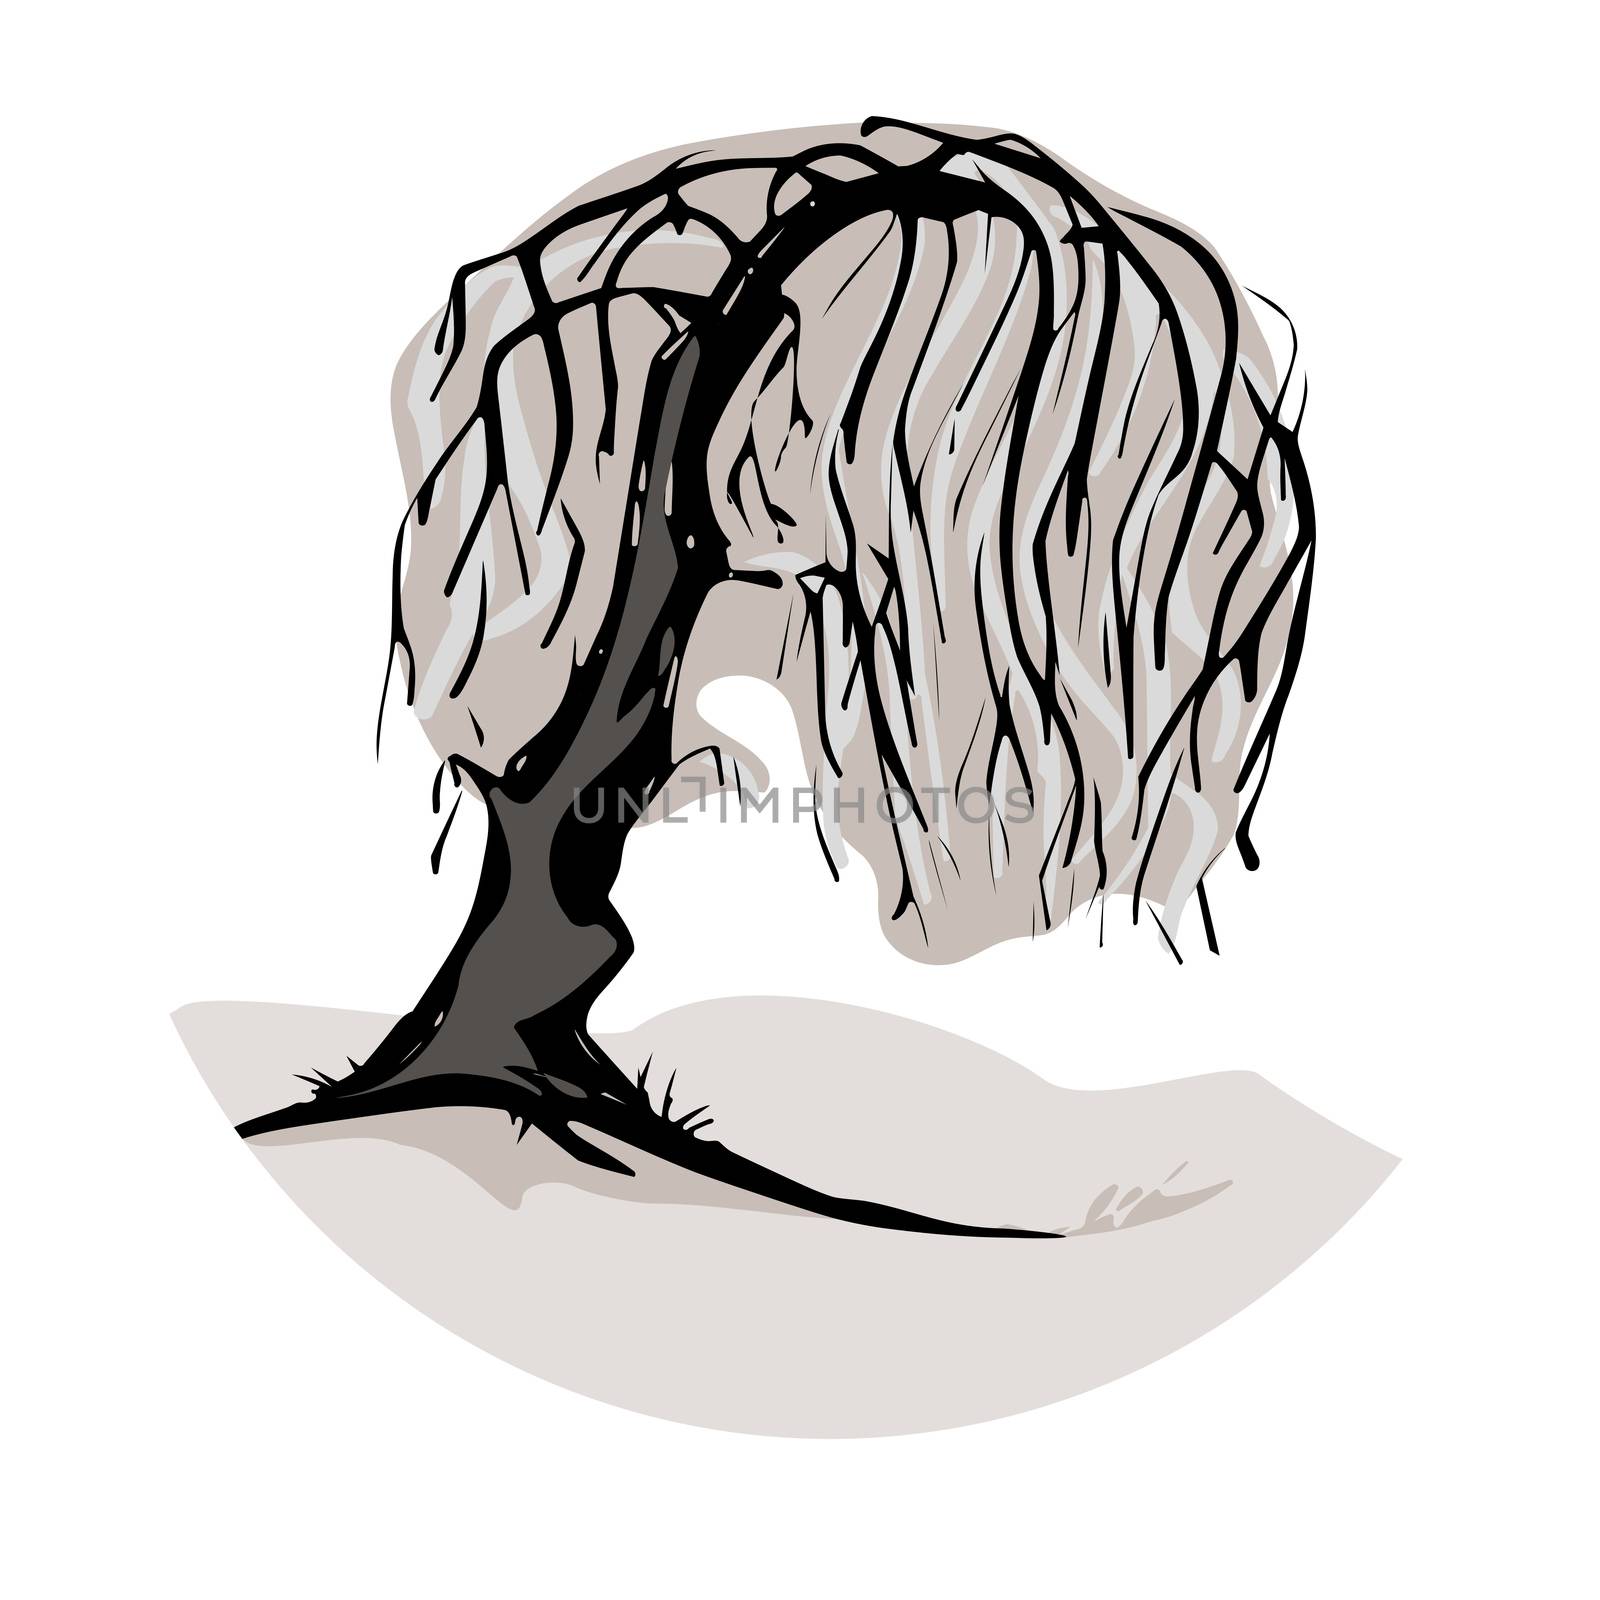 A weeping willow tree symbol by magann